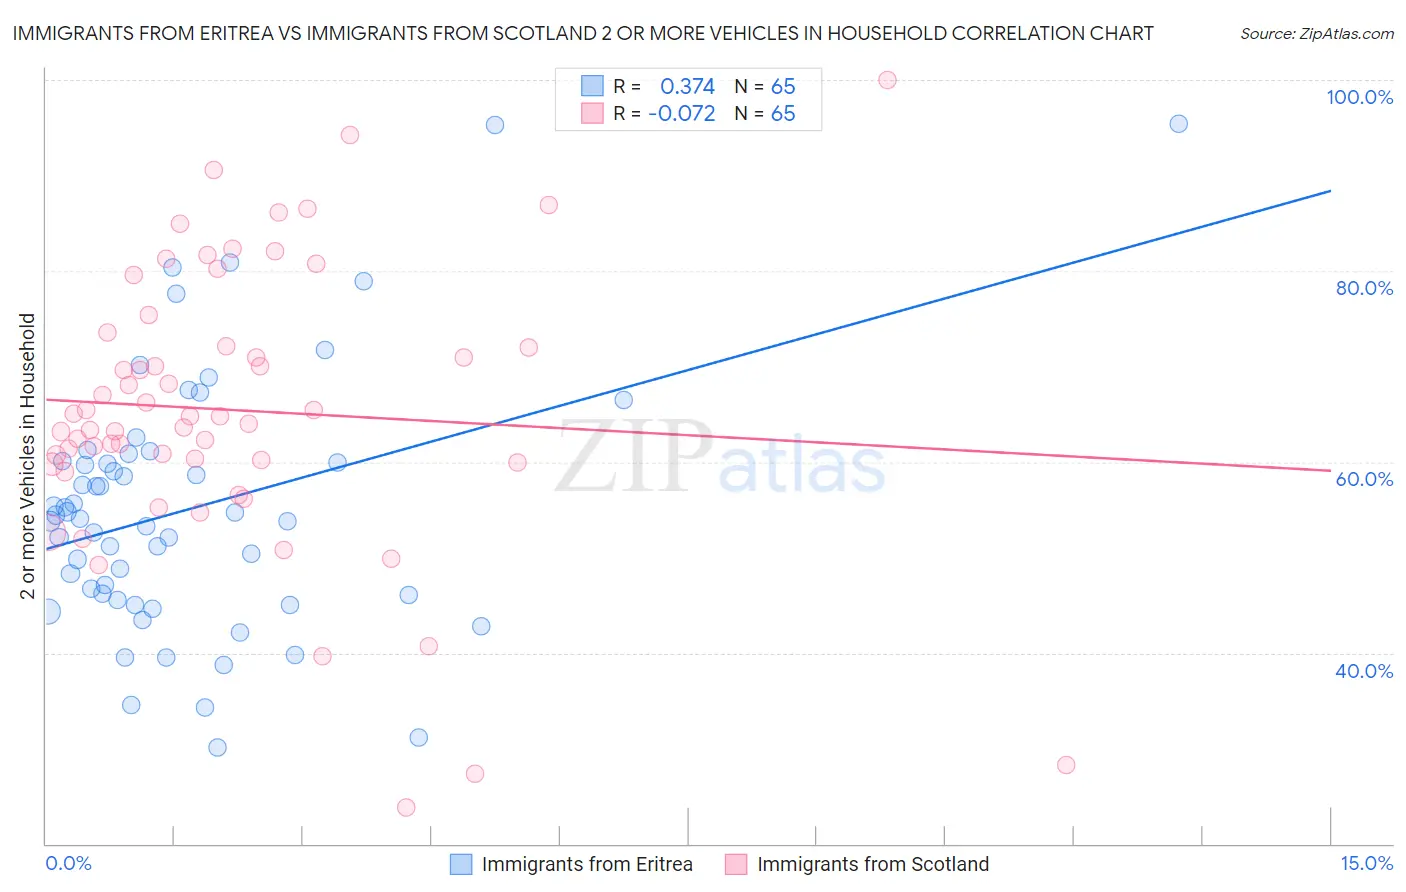 Immigrants from Eritrea vs Immigrants from Scotland 2 or more Vehicles in Household